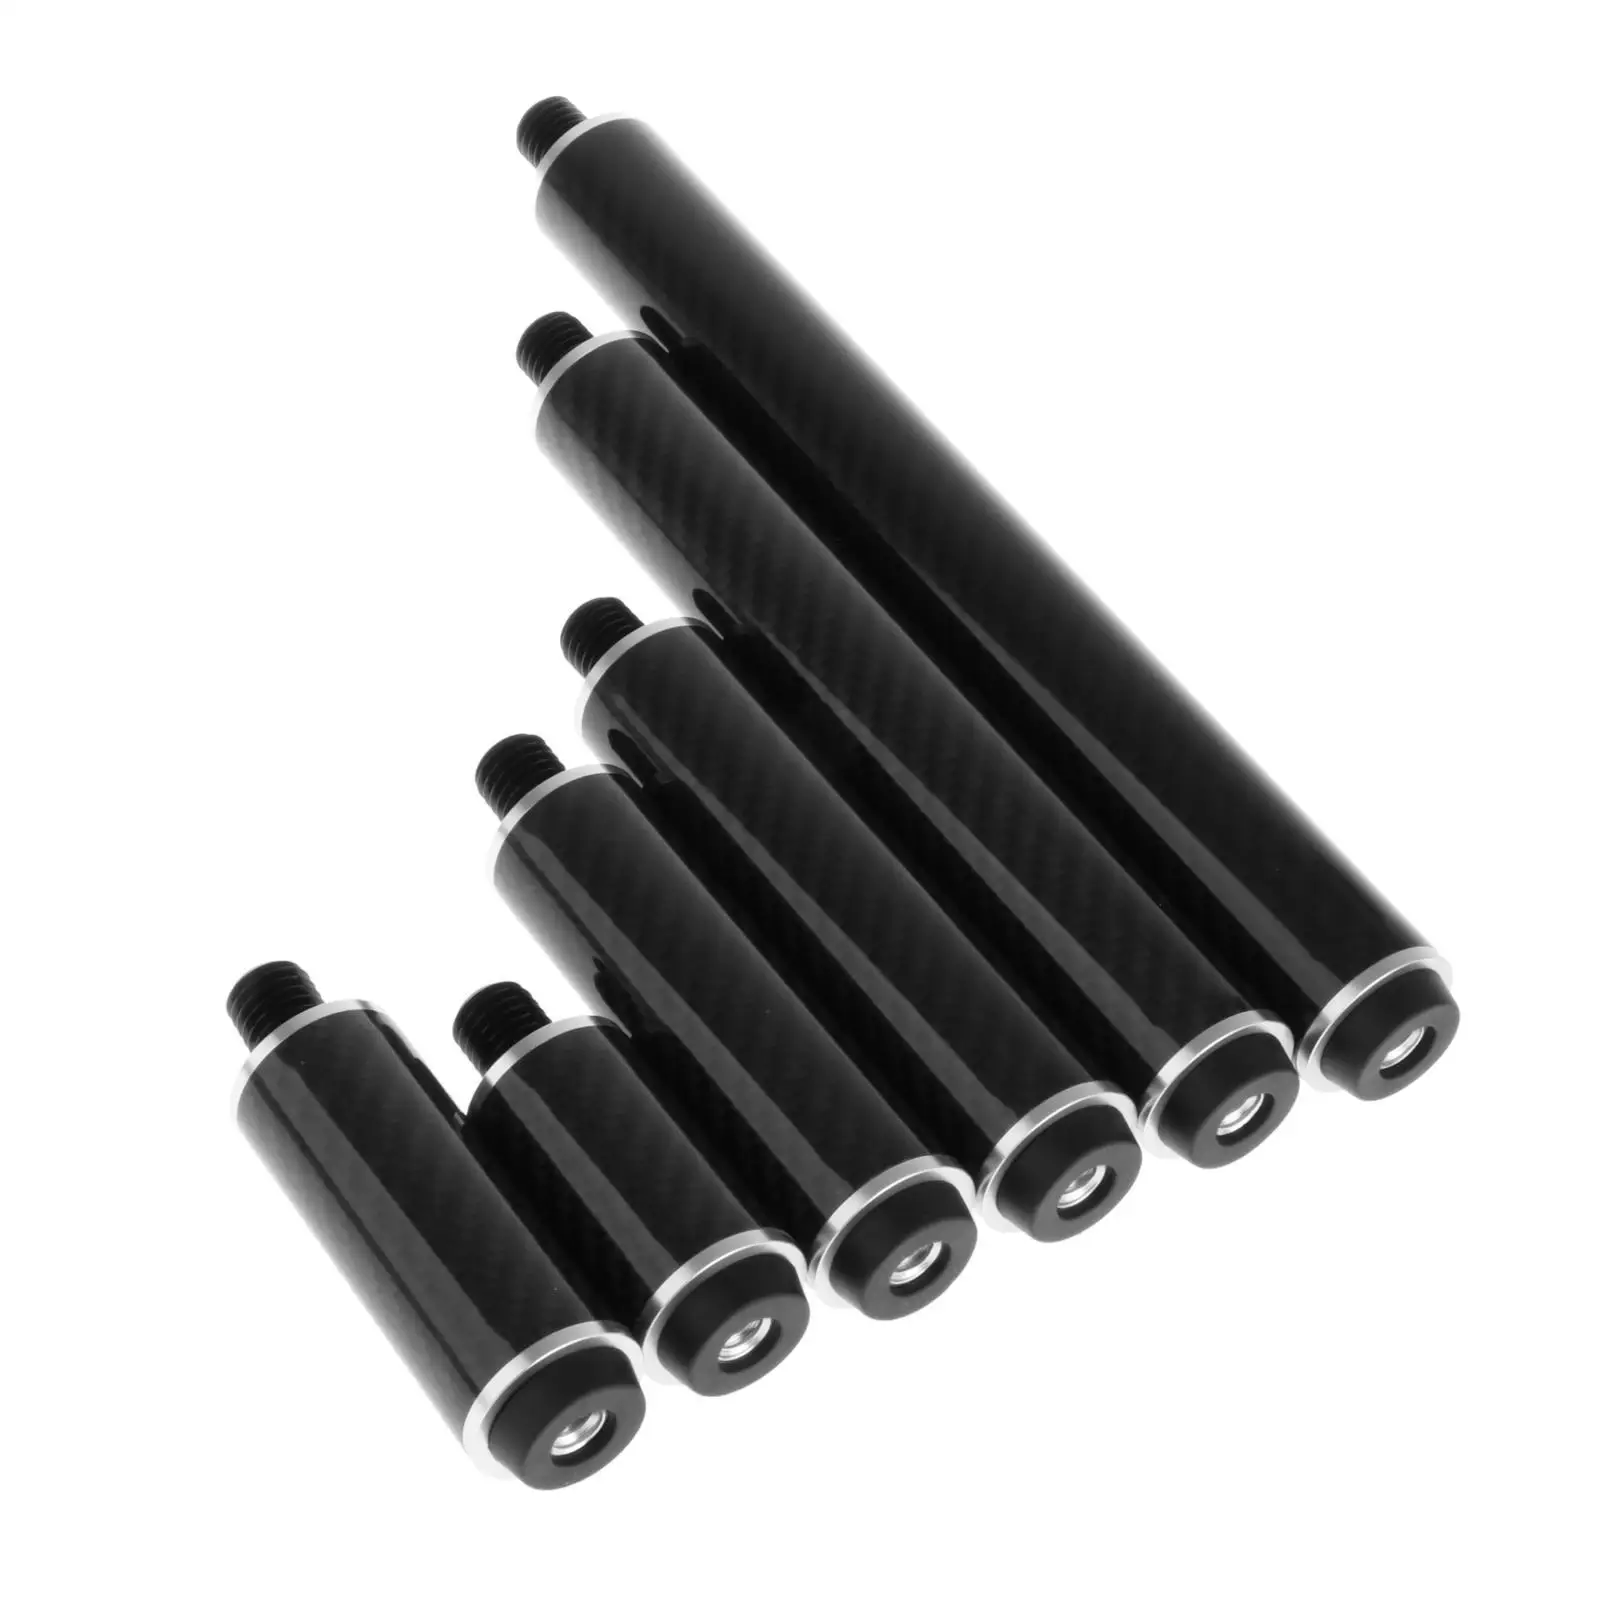 Billiards Pool Cue Extension Lightweight with Back Cap Cue End Extender